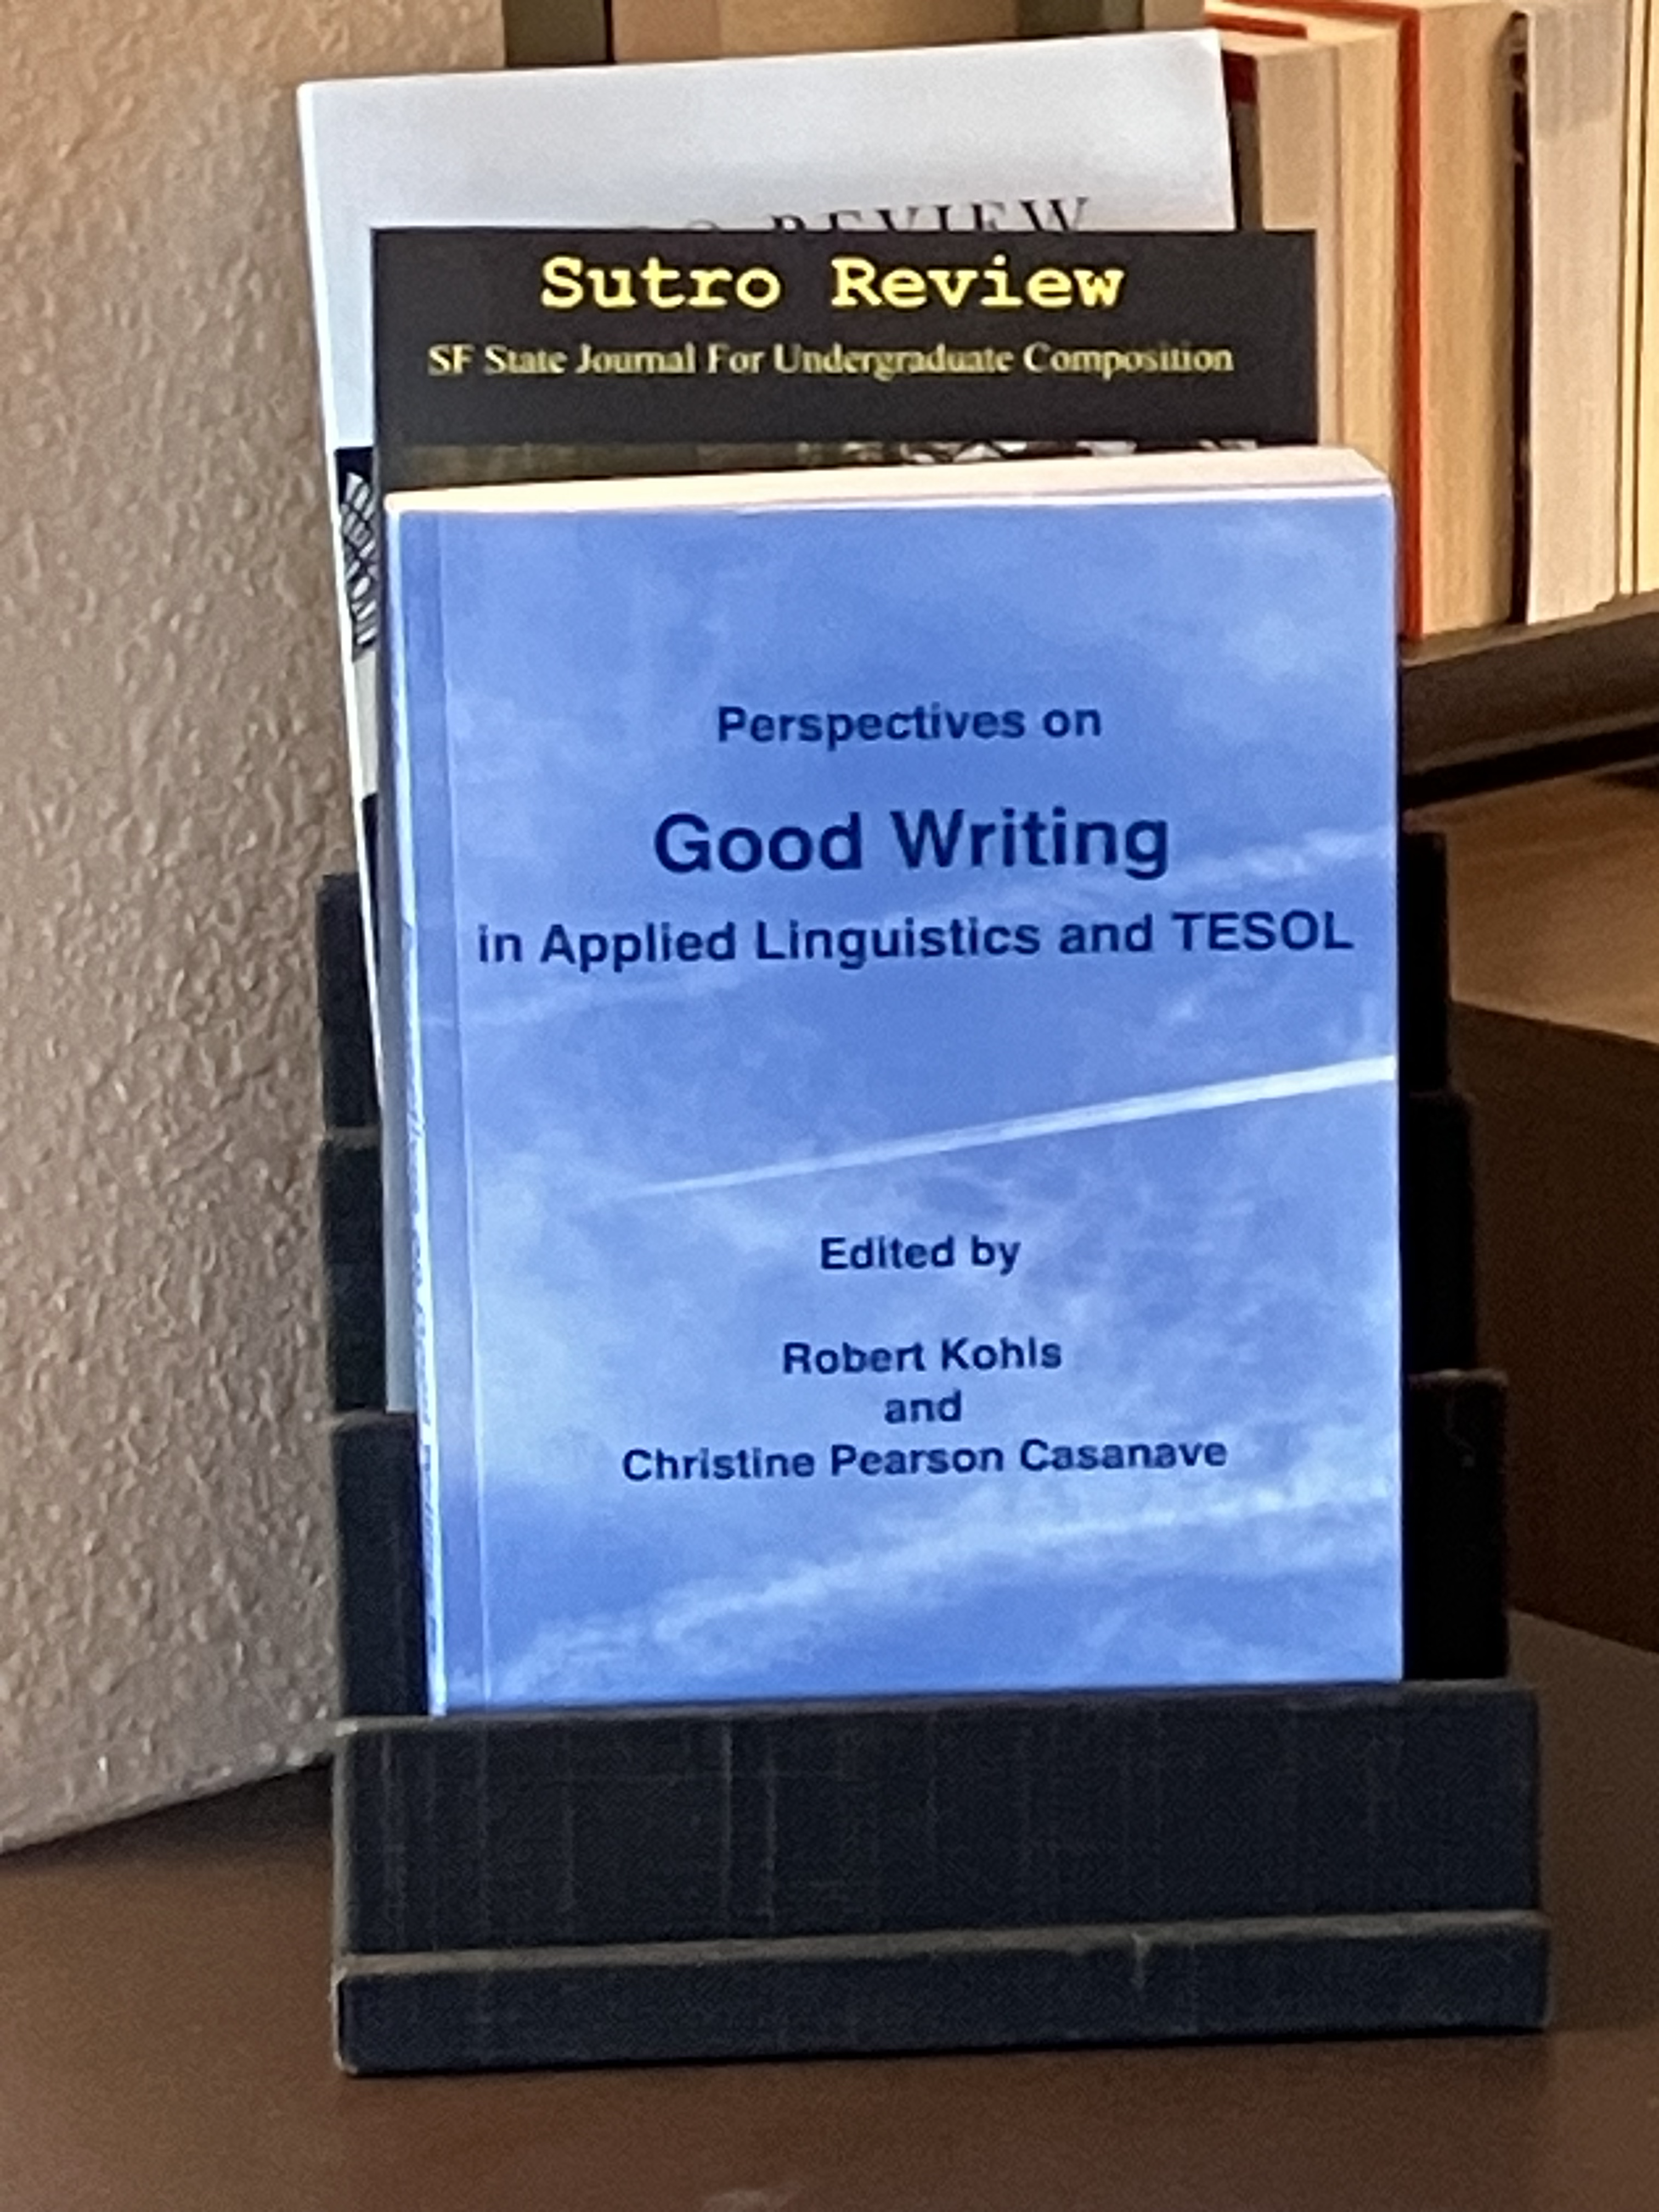 Good Writing in Applied Linguistics and TESOL